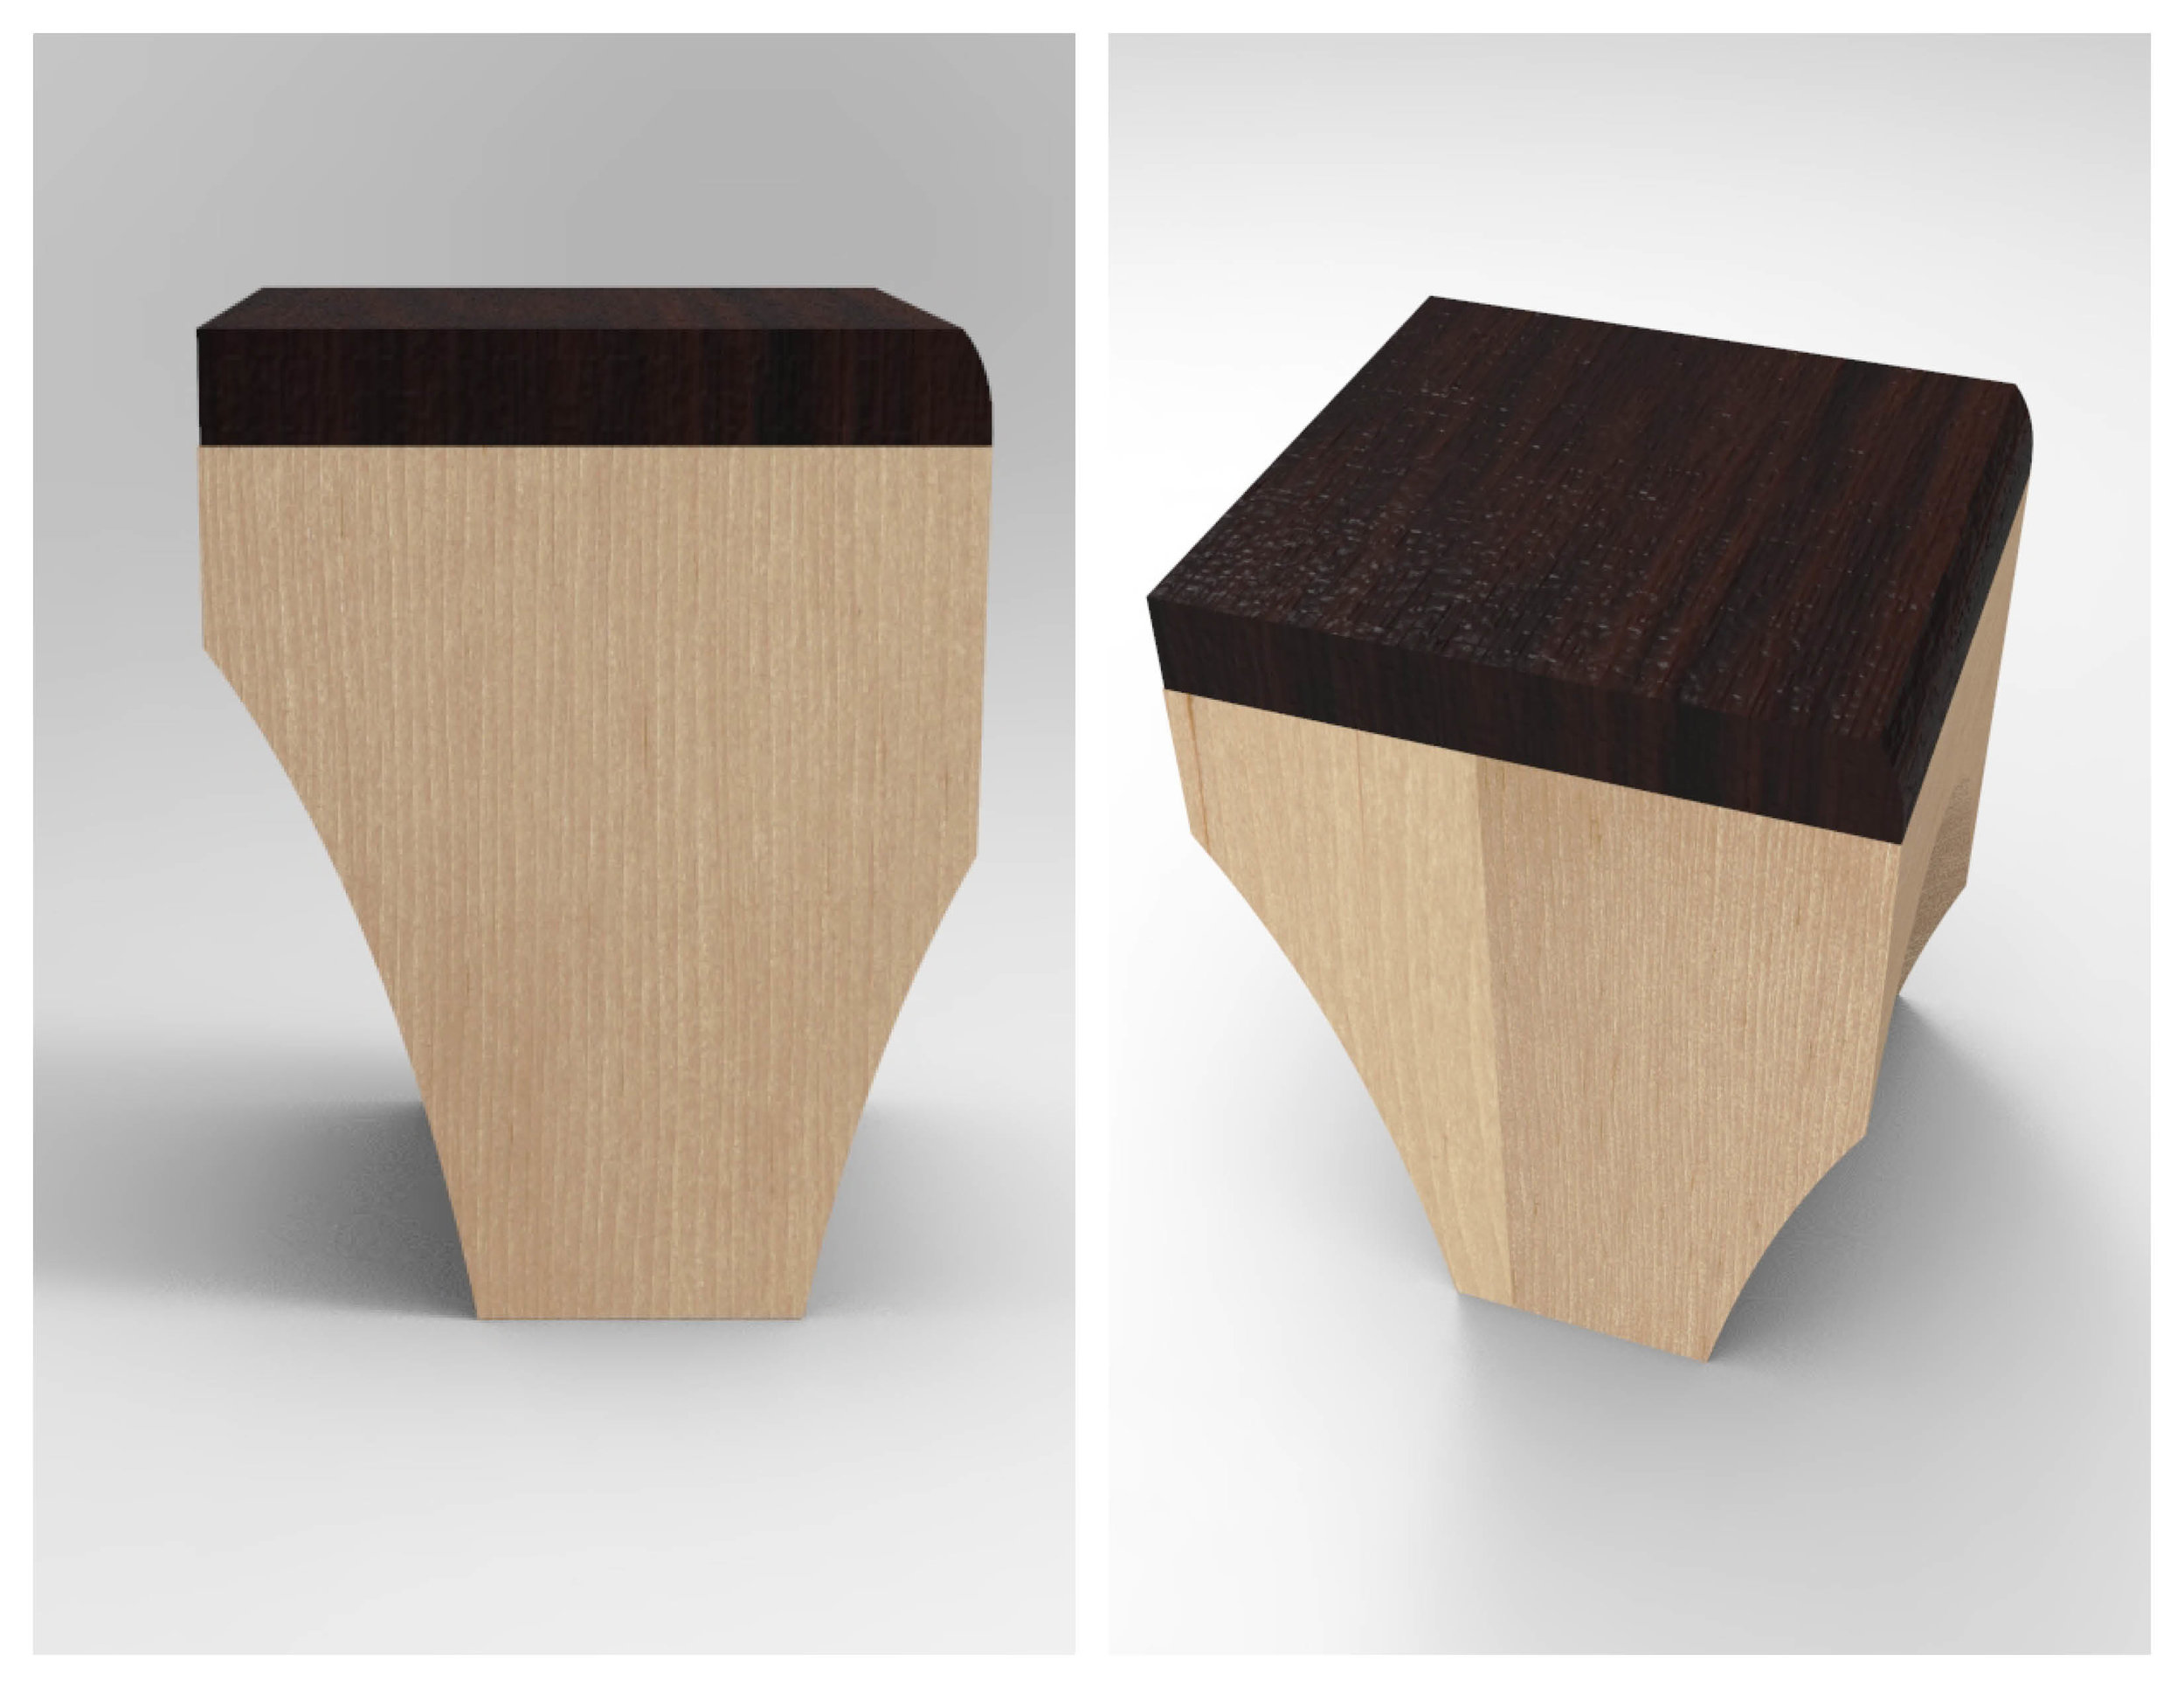 Stool Concept 1: Frontal and Perspective Views